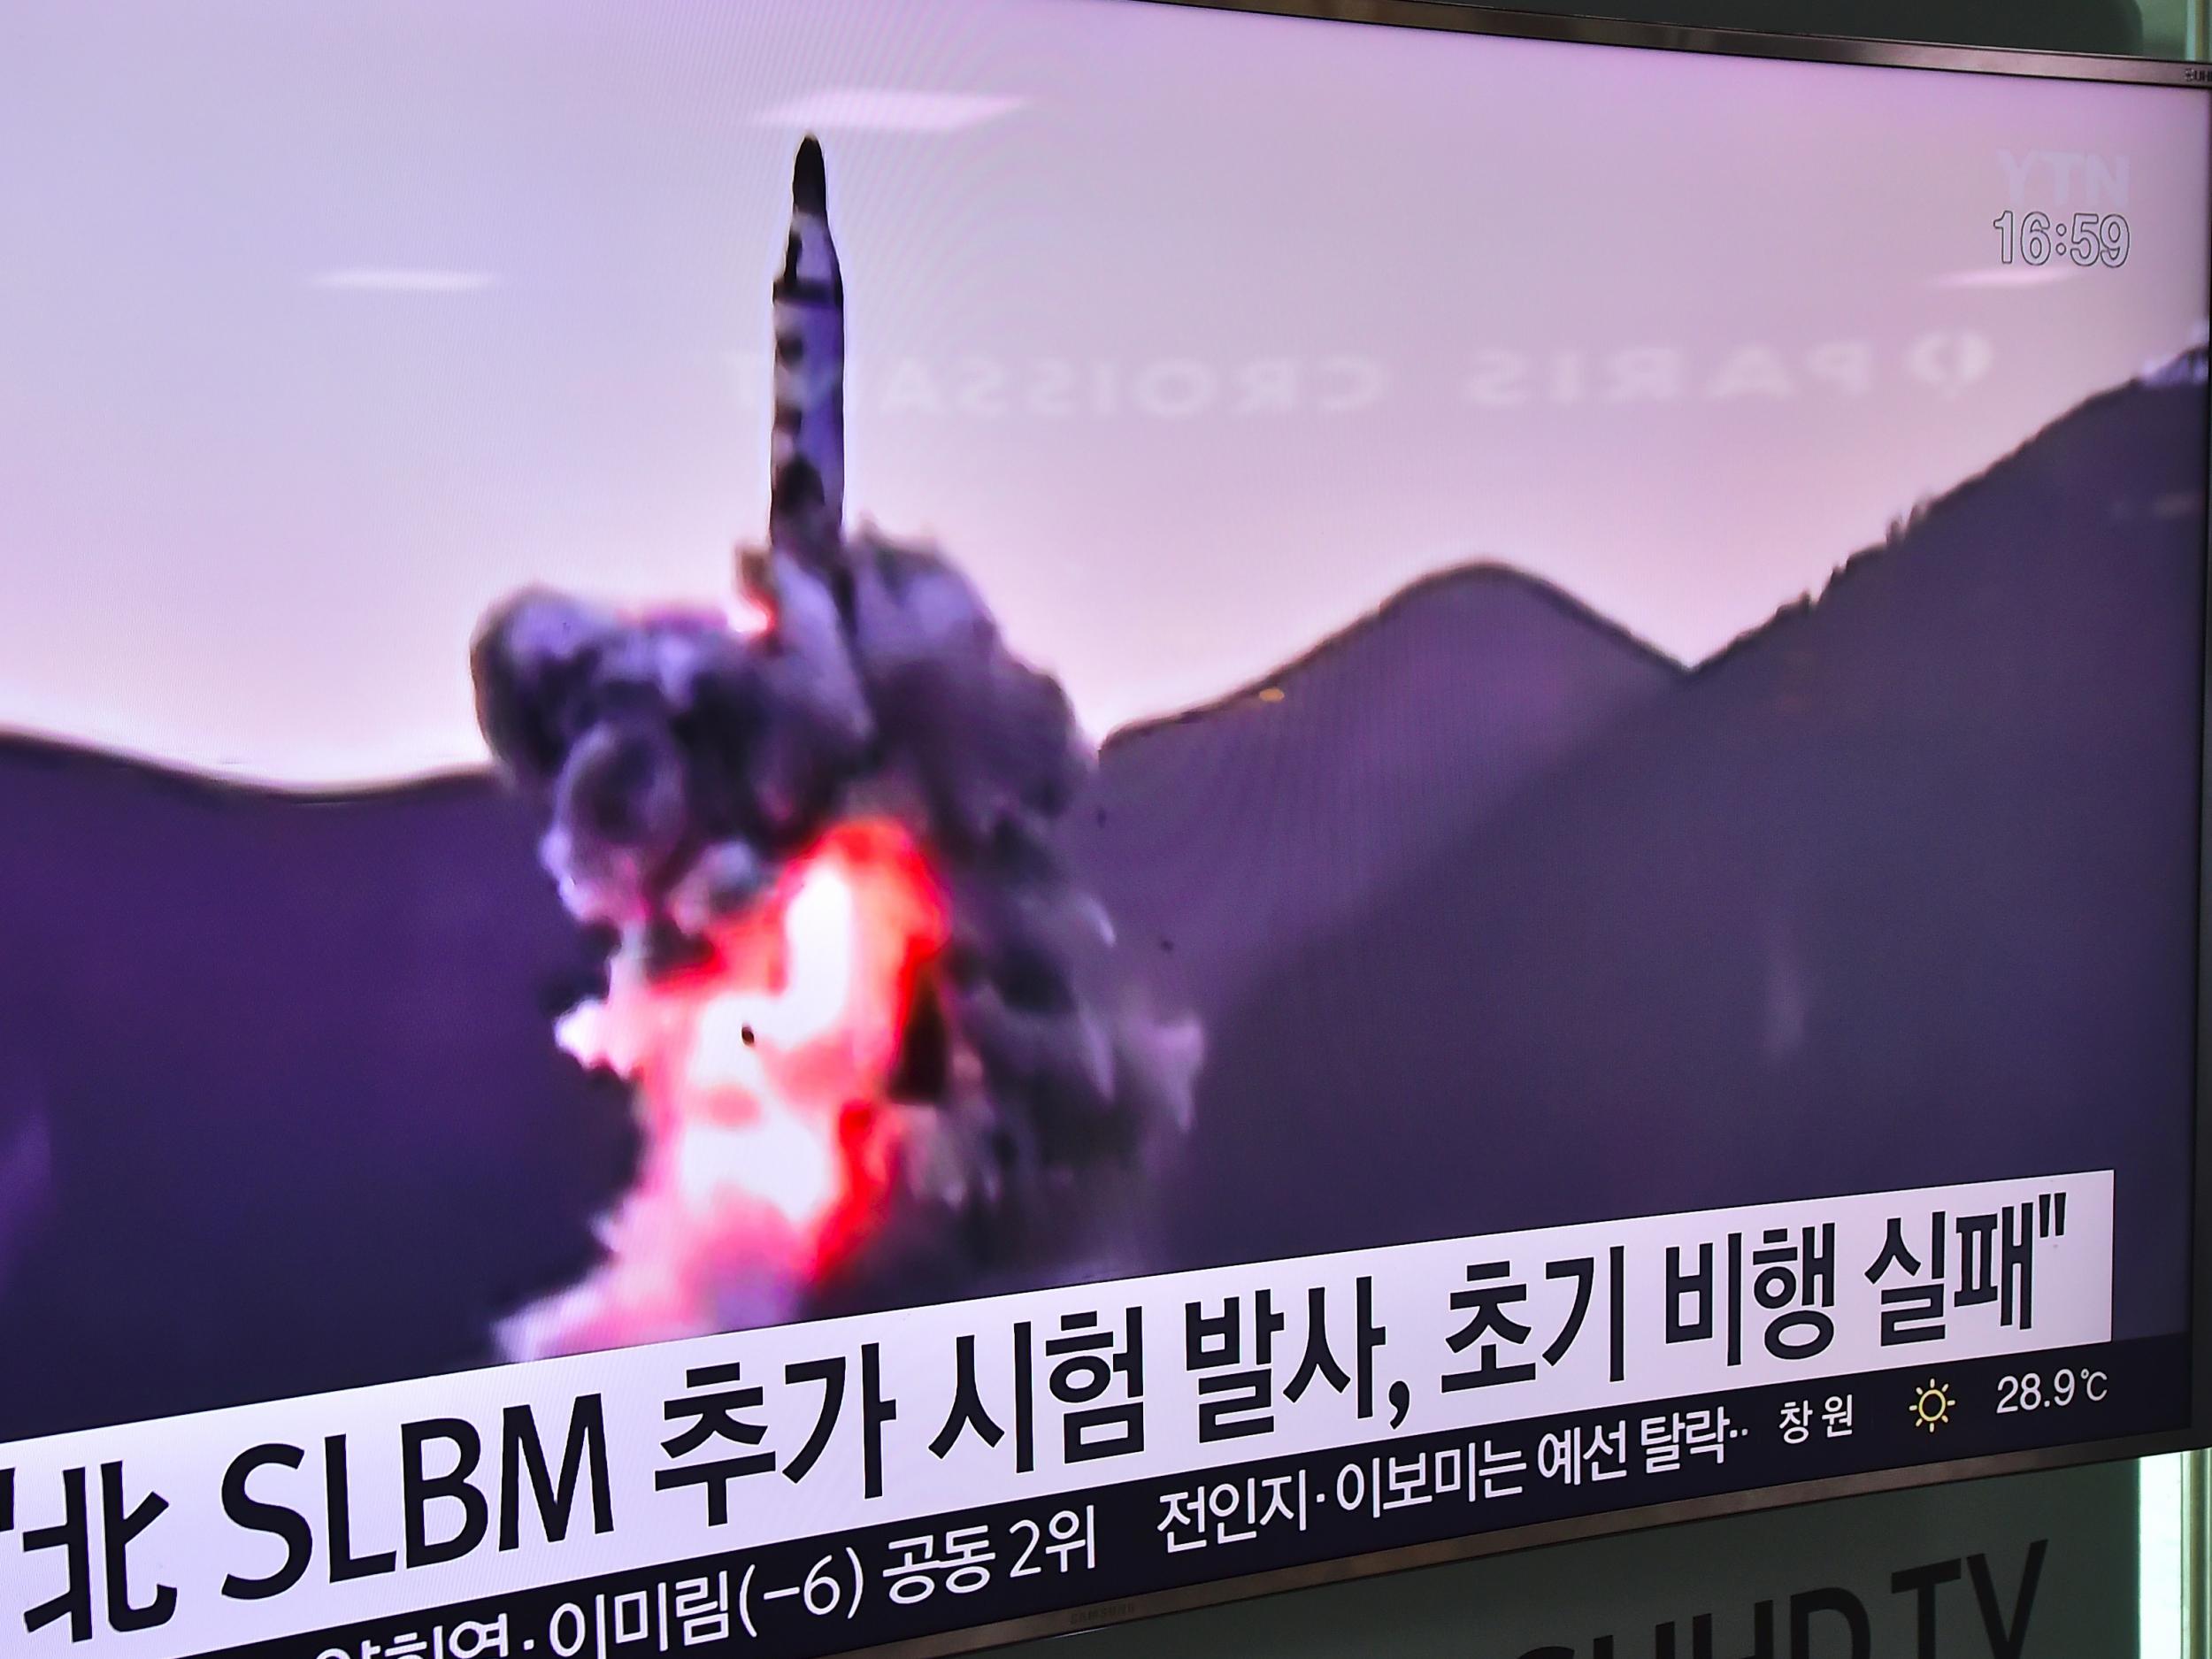 Footage of a North Korean missile launch on July 9 2016